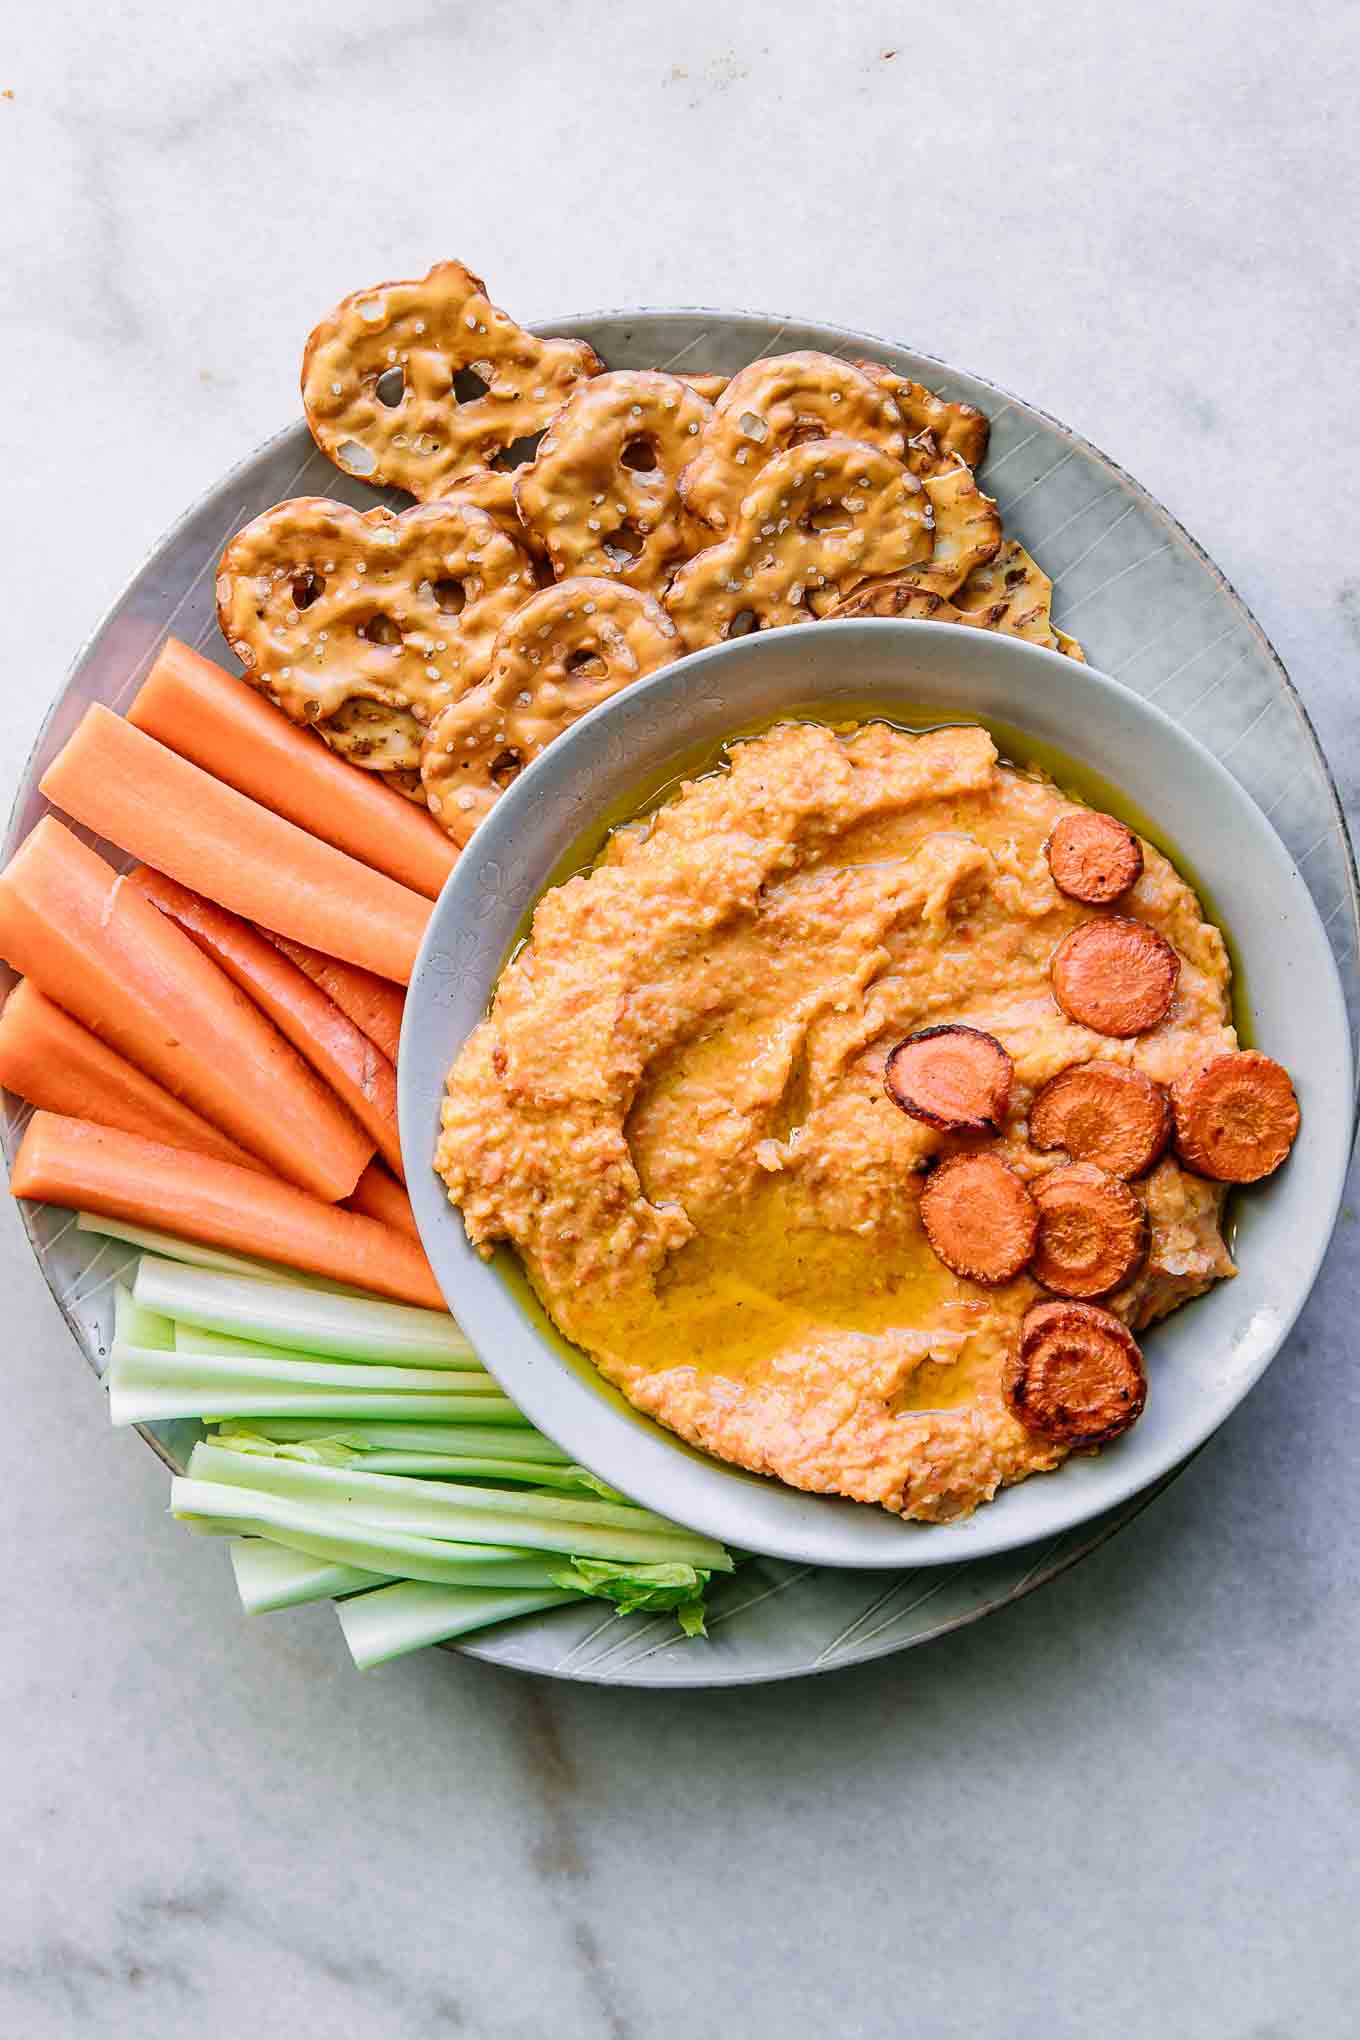 a plate with orange carrot hummus and cut celery, carrots, and pretzels for dipping on a white table